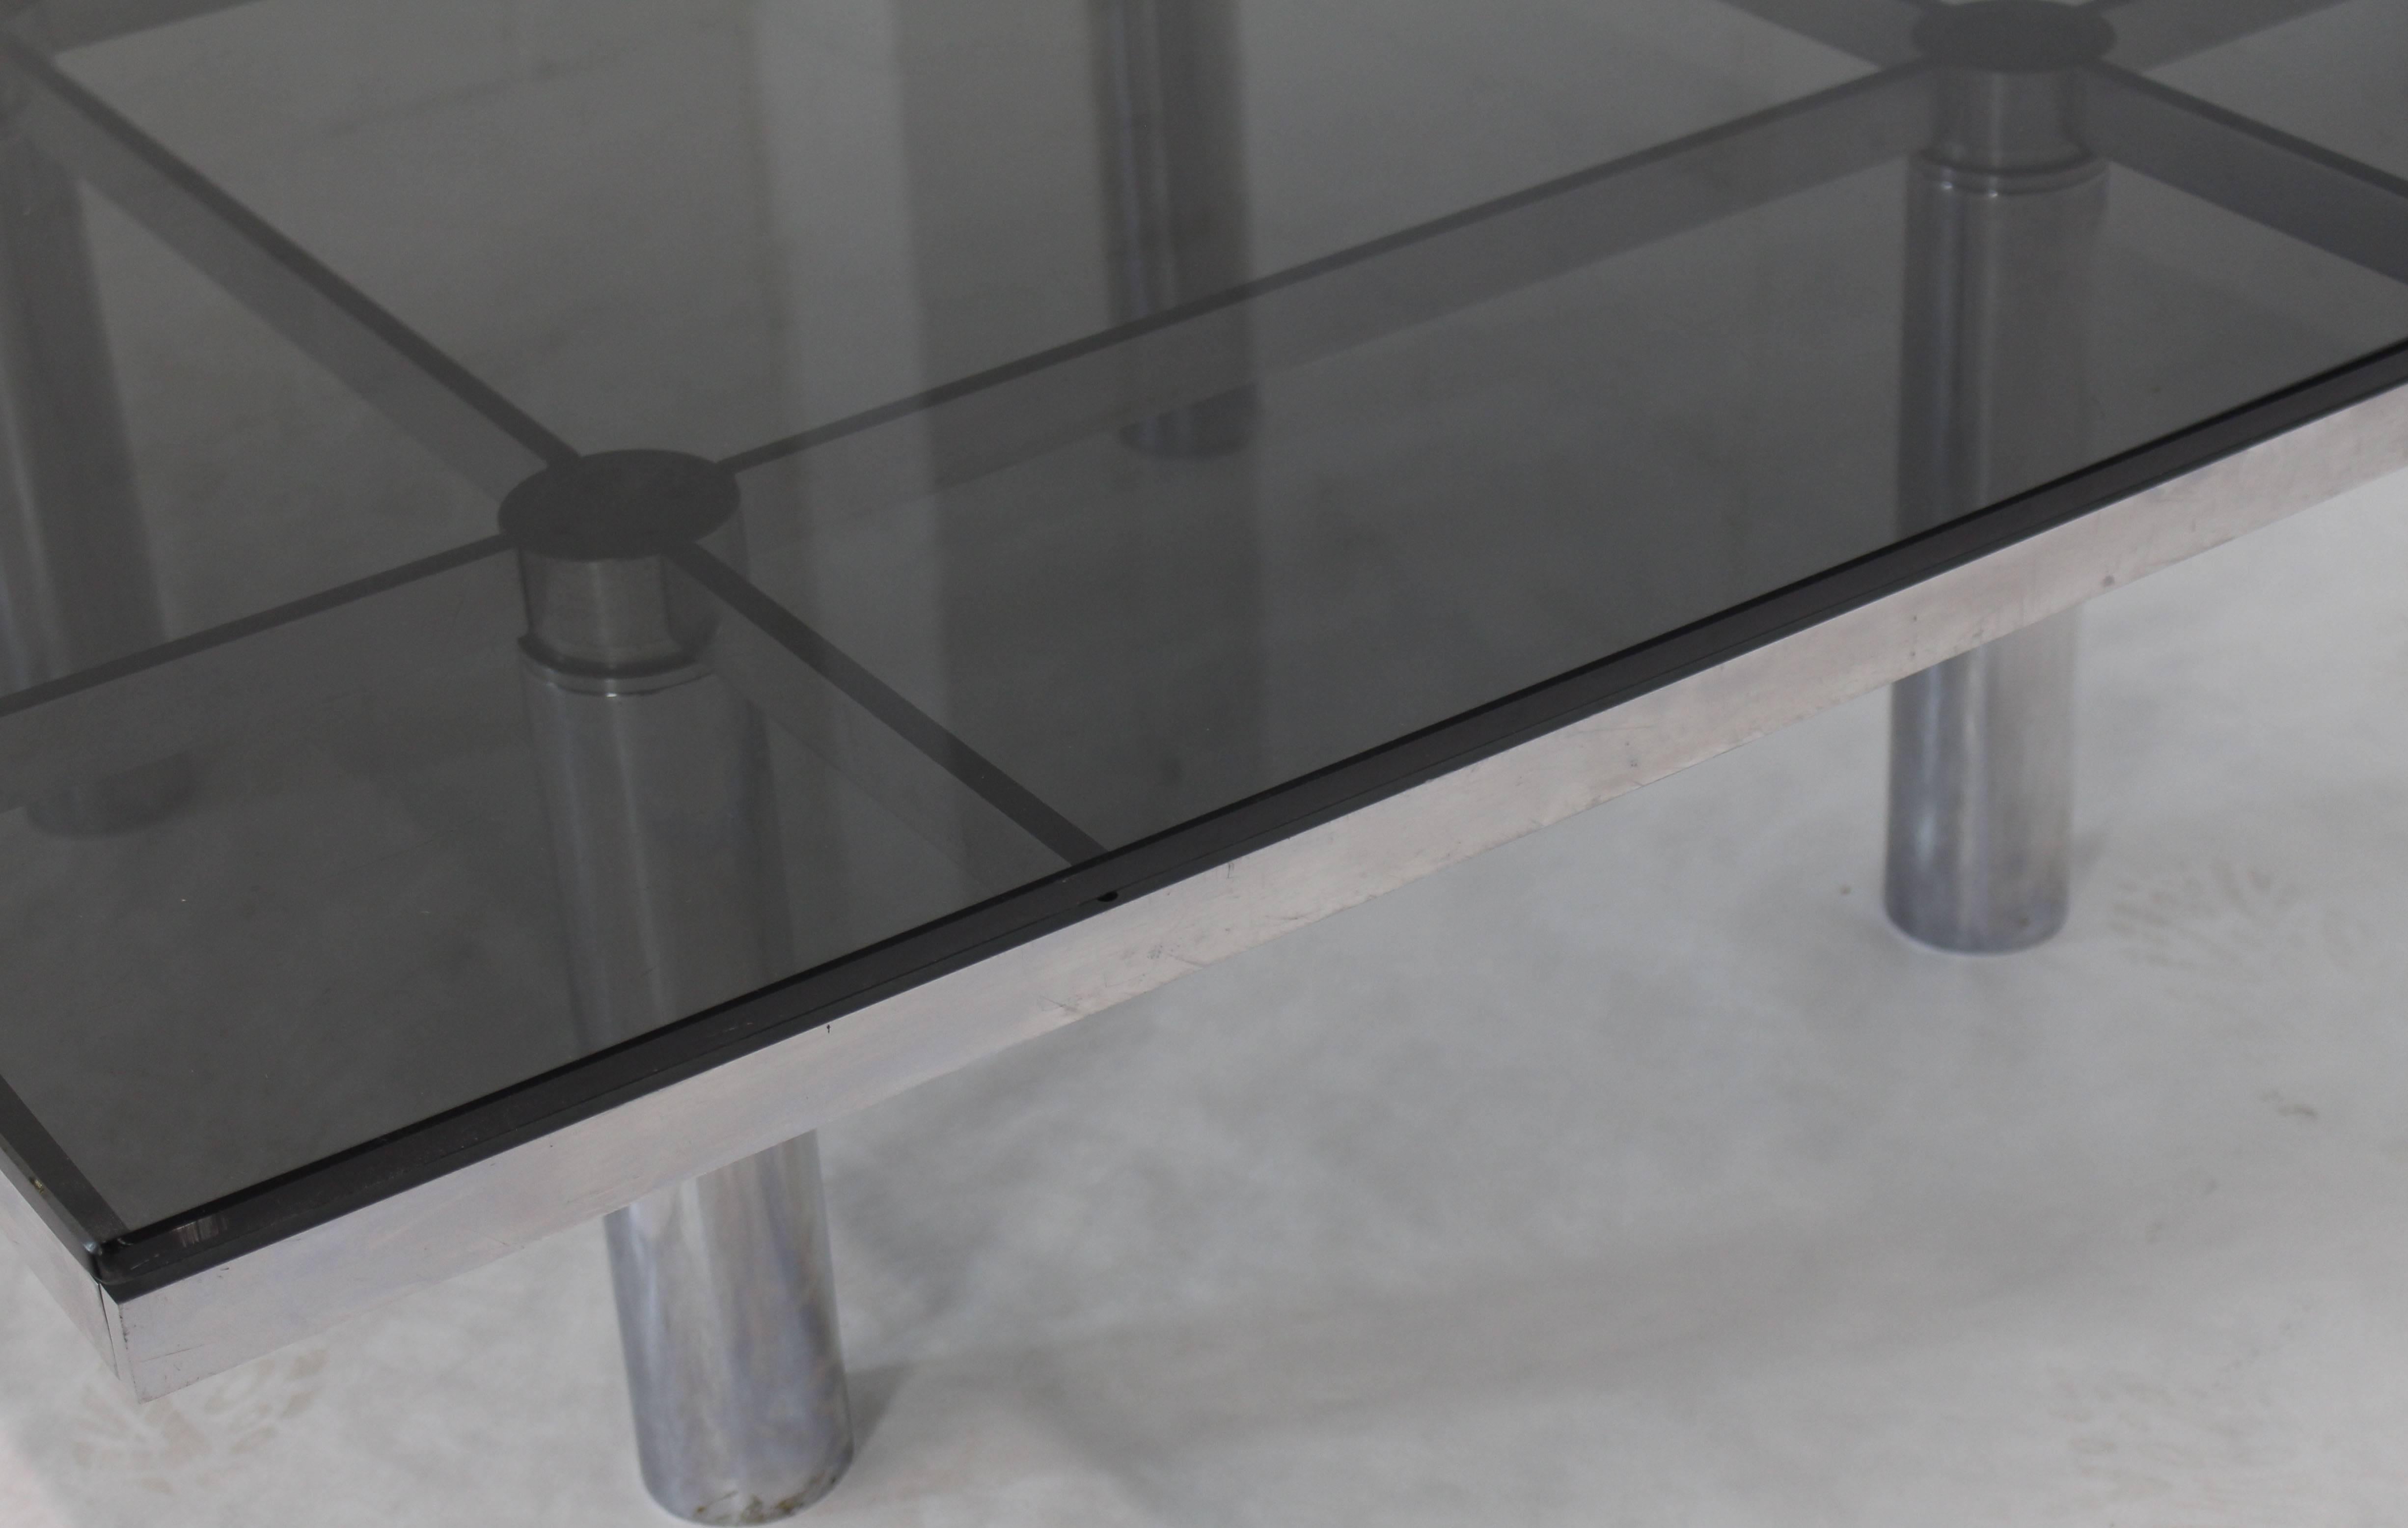 20th Century Square Chrome Smoke Glass Coffee Table by Tobia Scarpa for Knoll